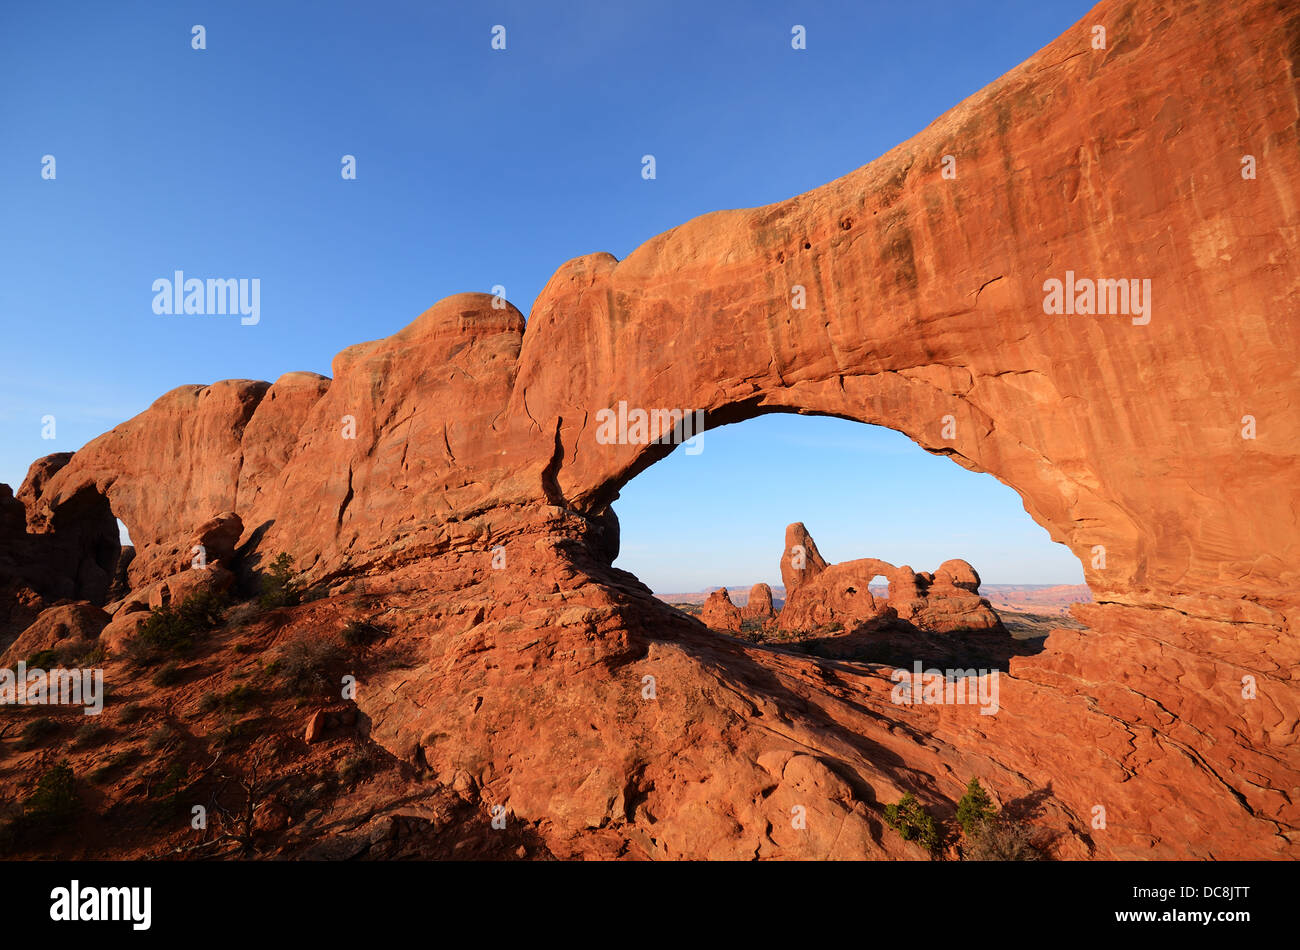 The North Window arch rock formation in the Arches National Park, Utah, USA Stock Photo